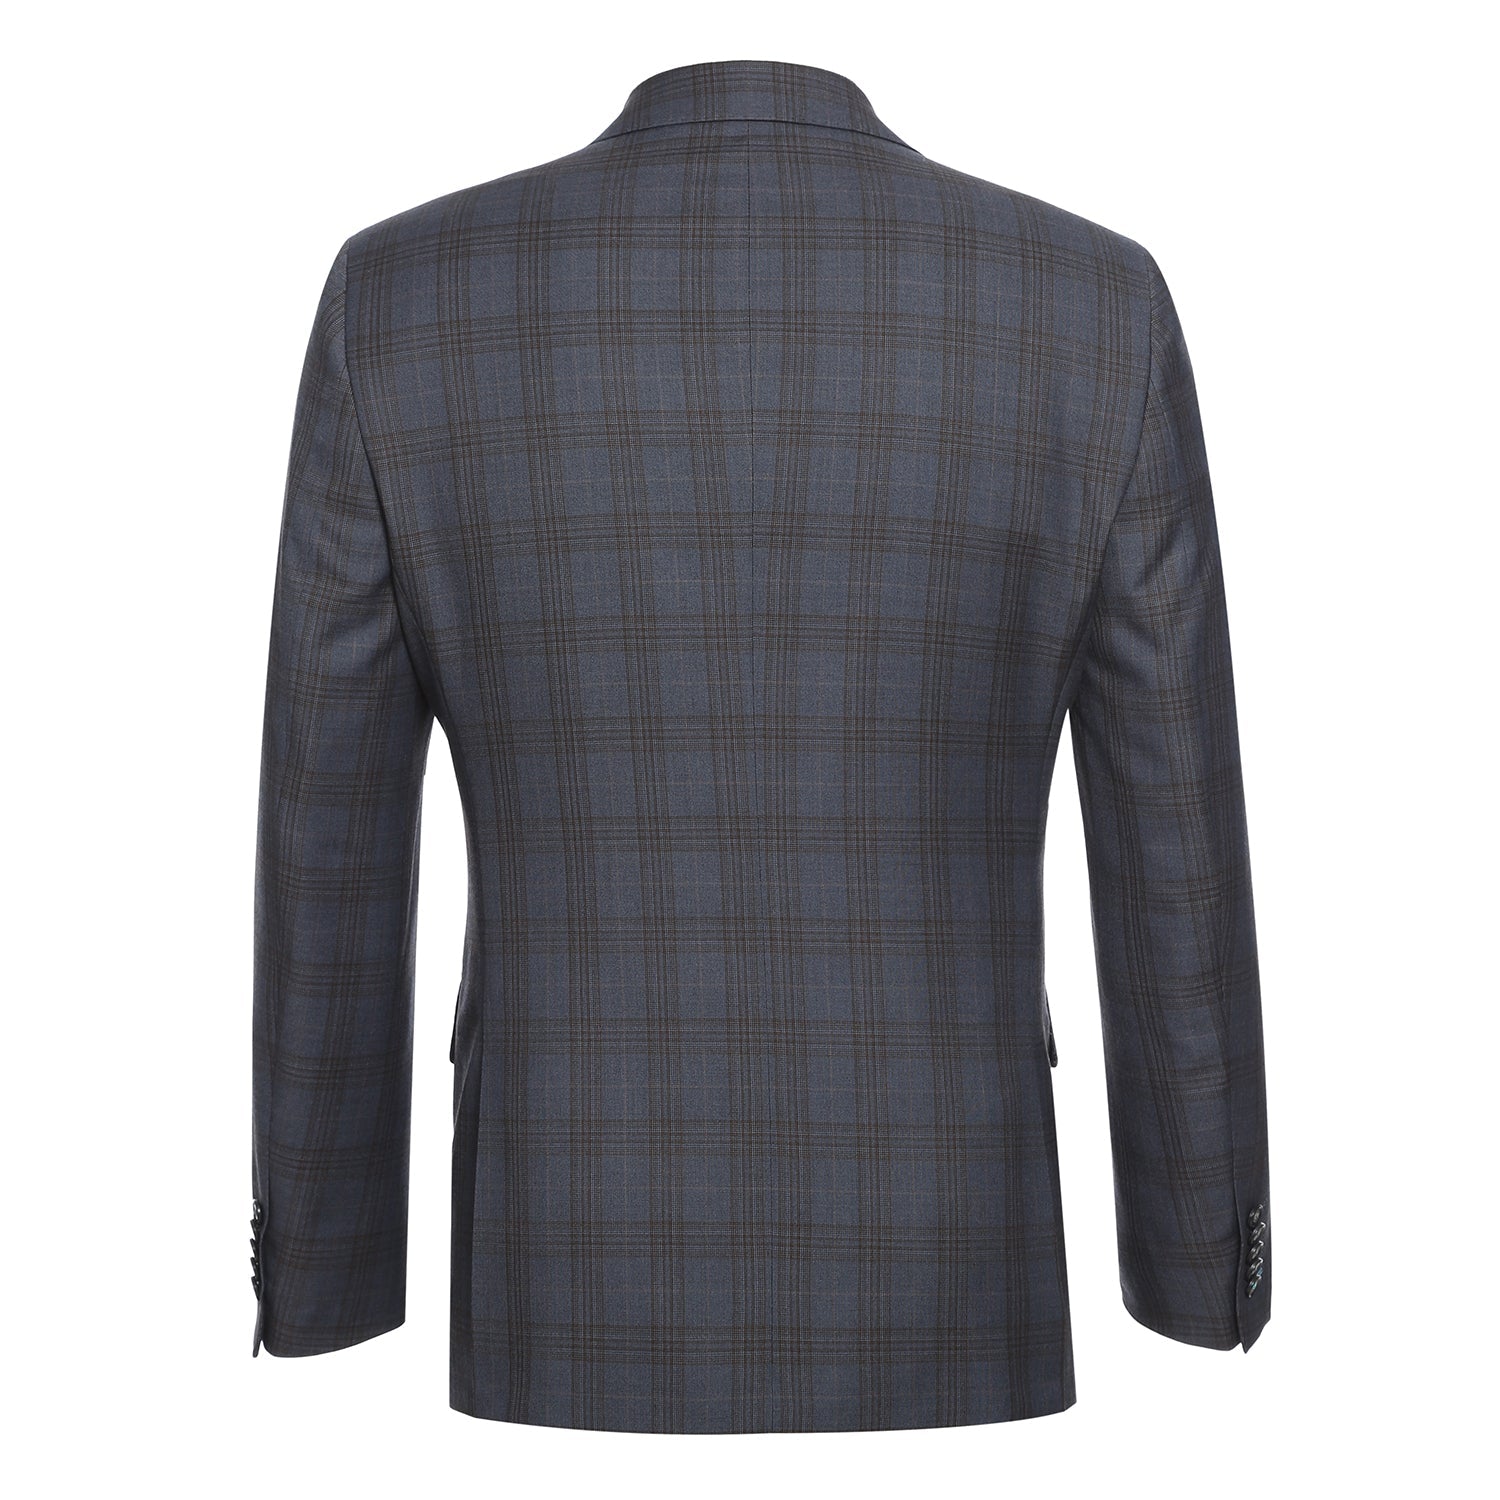 Stretch Performance Single Breasted SLIM FIT Suit in Grey and Tan Plaid (Short, Regular, and Long Available) by English Laundry